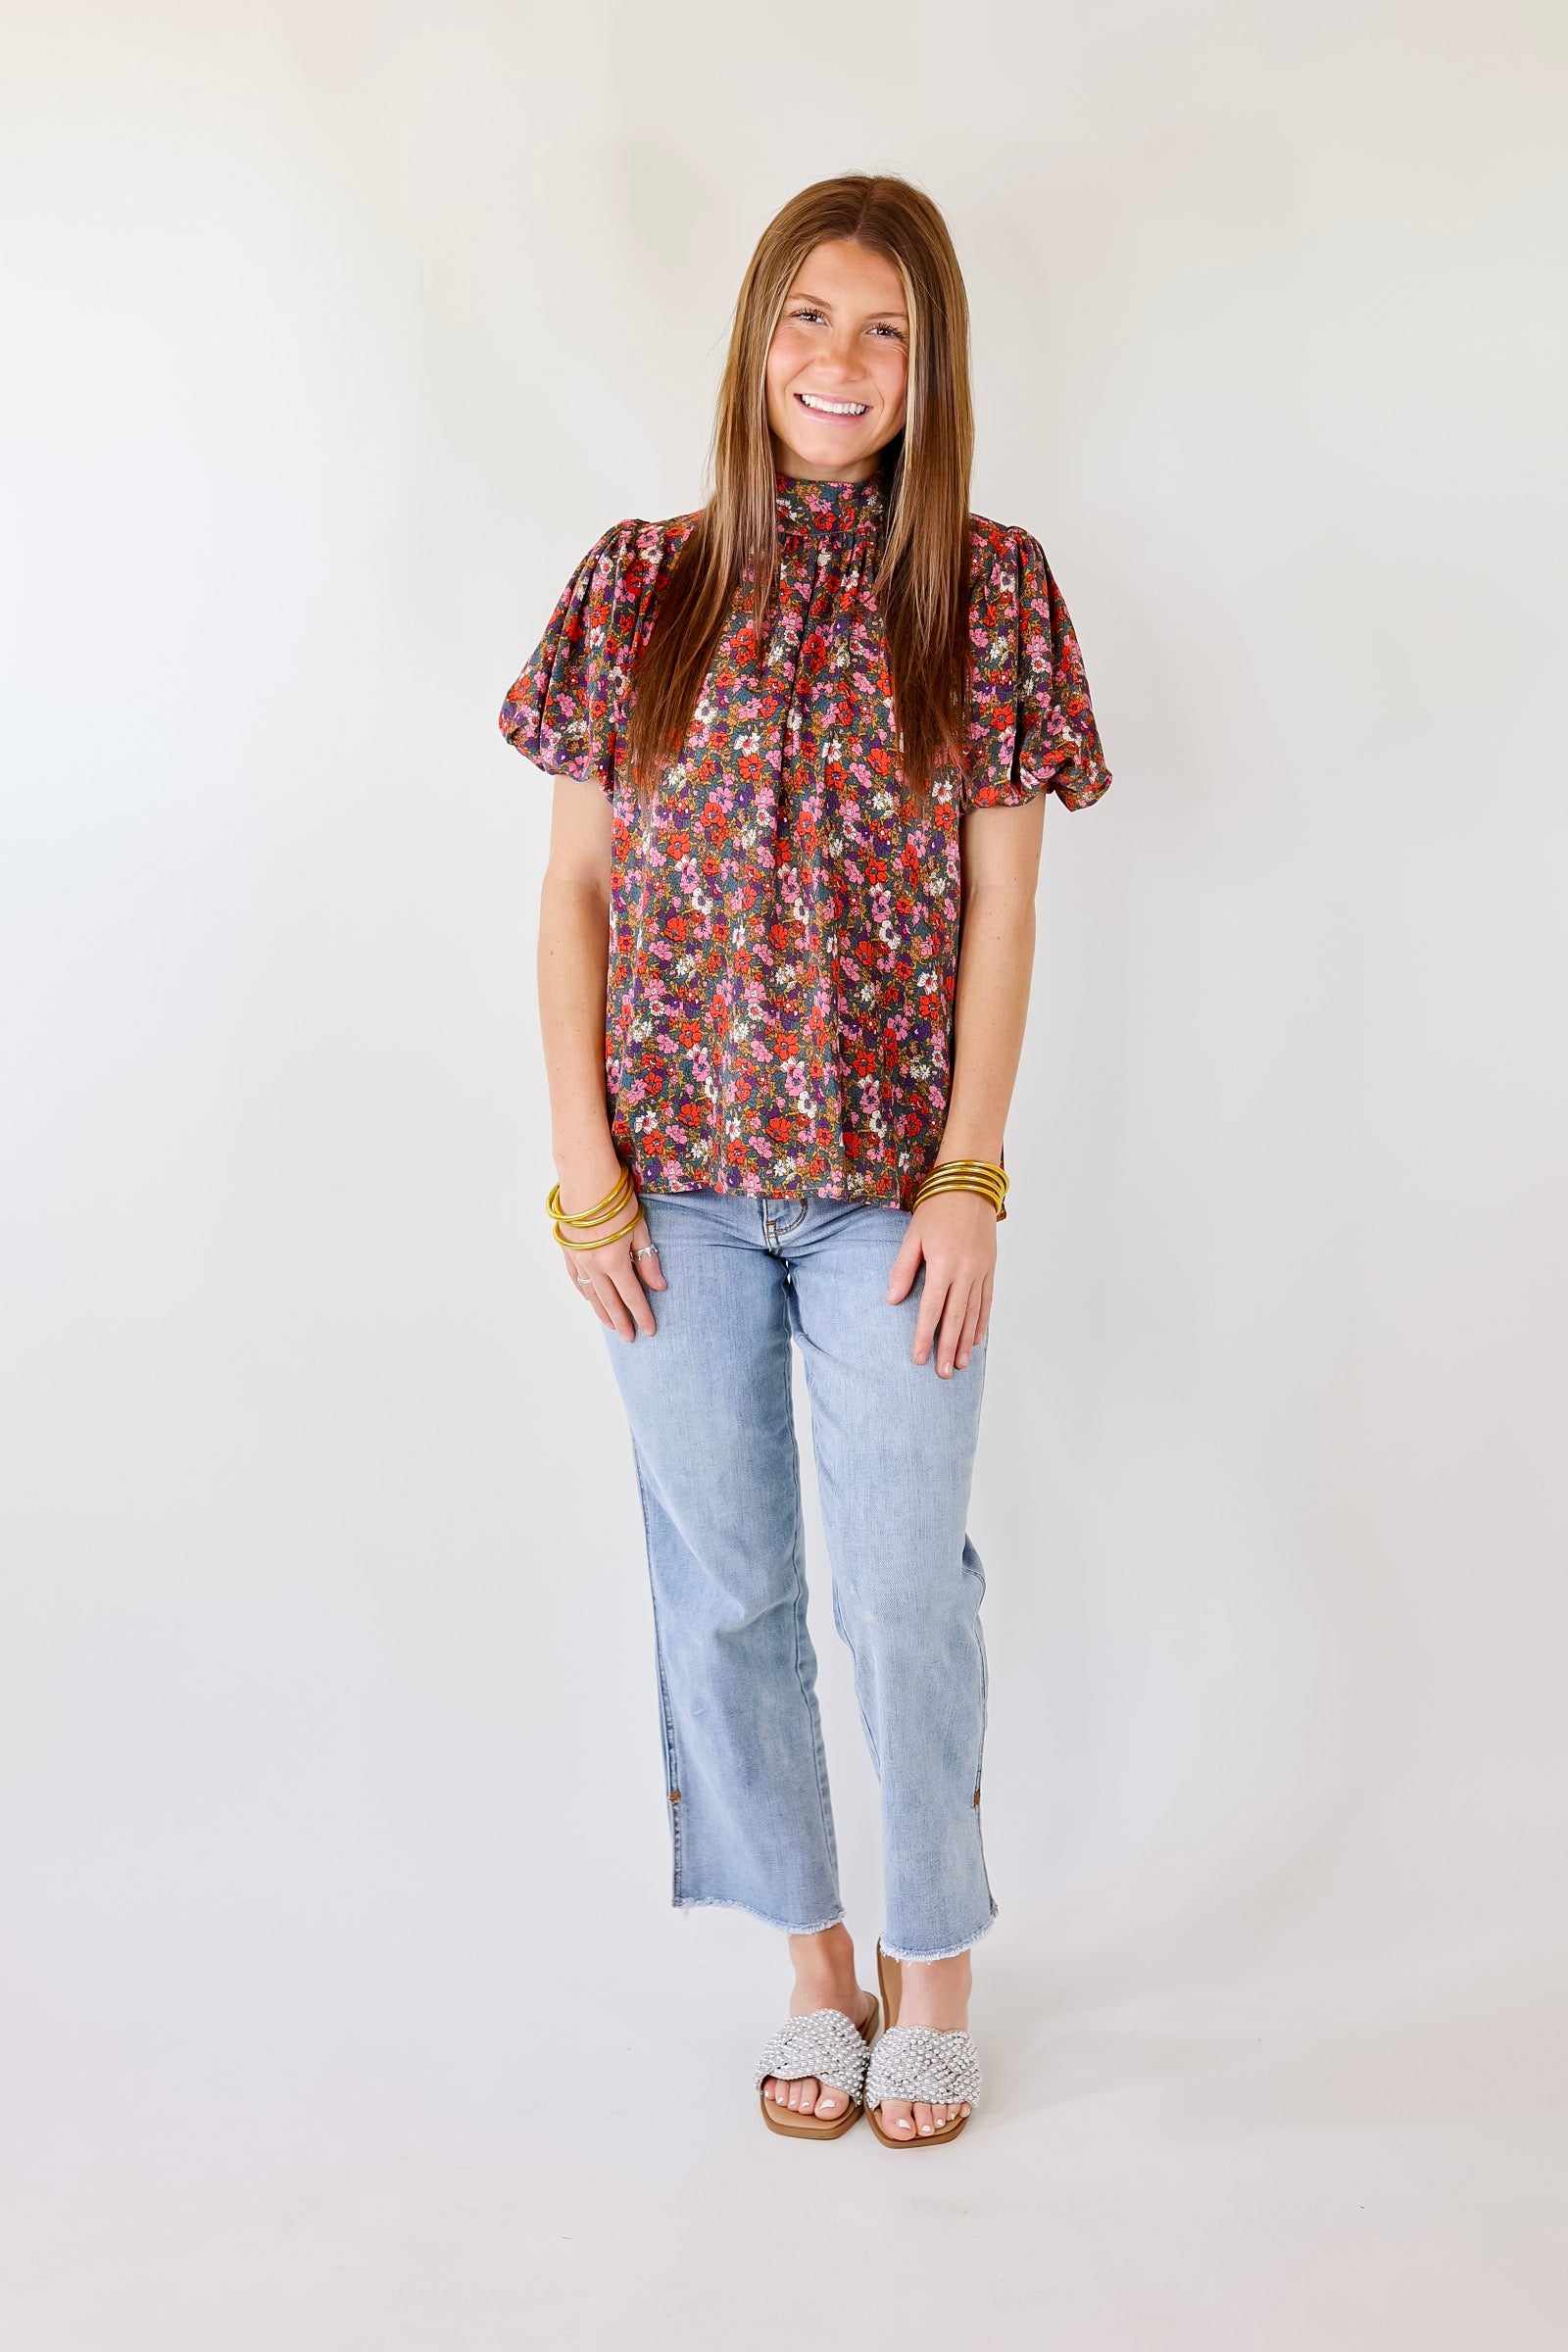 All Day Divine Mock Neck Floral Short Sleeve Top with Tie Back - Giddy Up Glamour Boutique